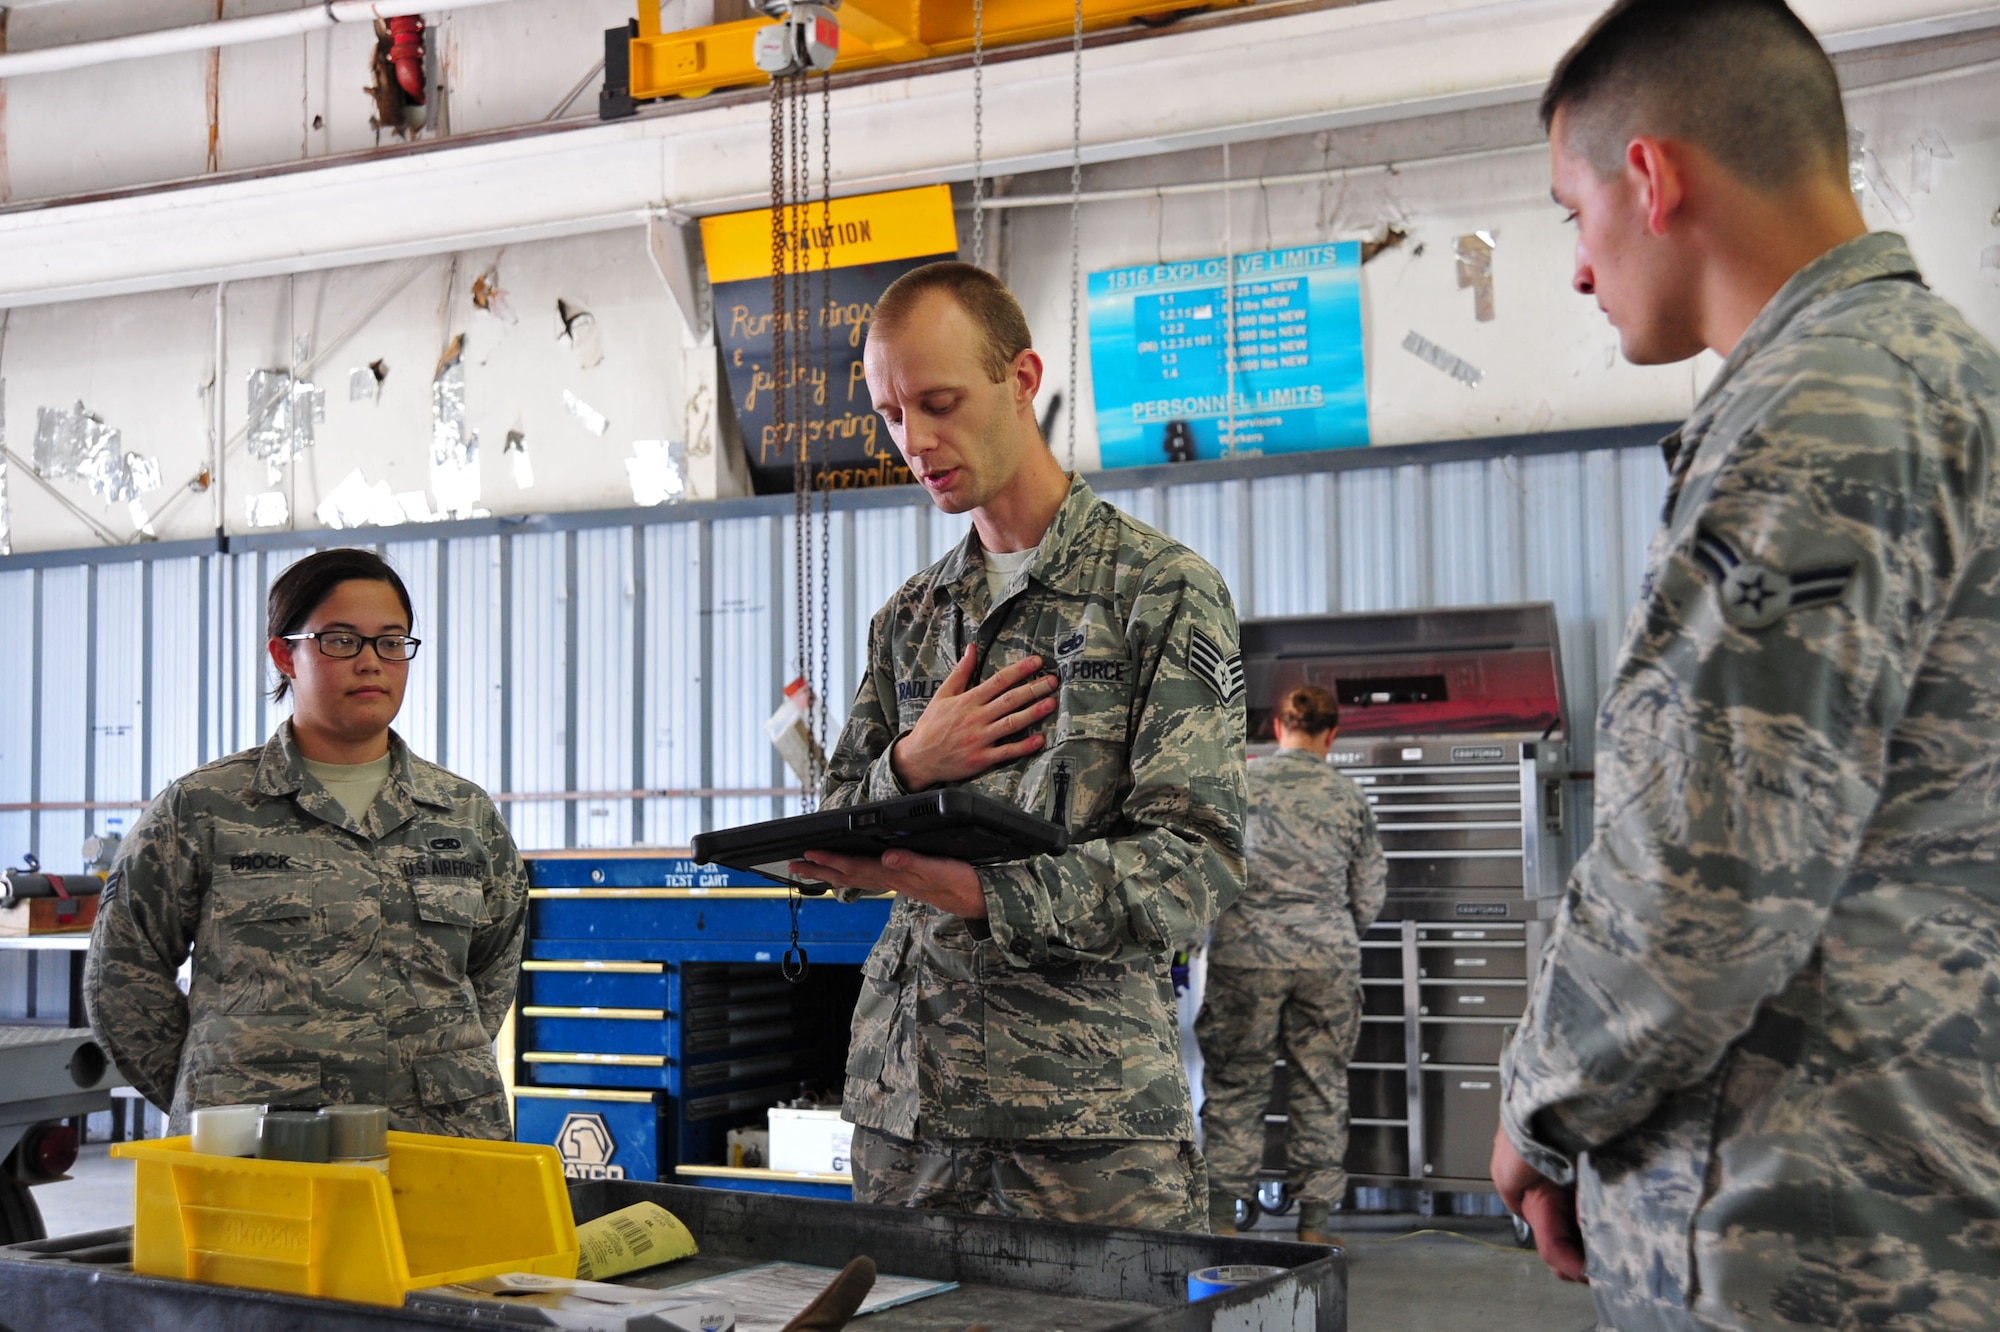 U.S. Air Force Staff Sgt. Joshua Bradley, 20th Equipment Maintenance Squadron (EMS) tactical aircraft maintainer, center, reads a technical order to Senior Airman Keri Brock, left, and Airman 1st Class Ty Lerum, 20th EMS precision guided munitions technicians, at Shaw Air Force Base, S.C., June 27, 2017. The technical order dictates every step the Airmen must take while inspecting munitions. (U.S. Air Force photo by Airman 1st Class Kathryn R.C. Reaves)